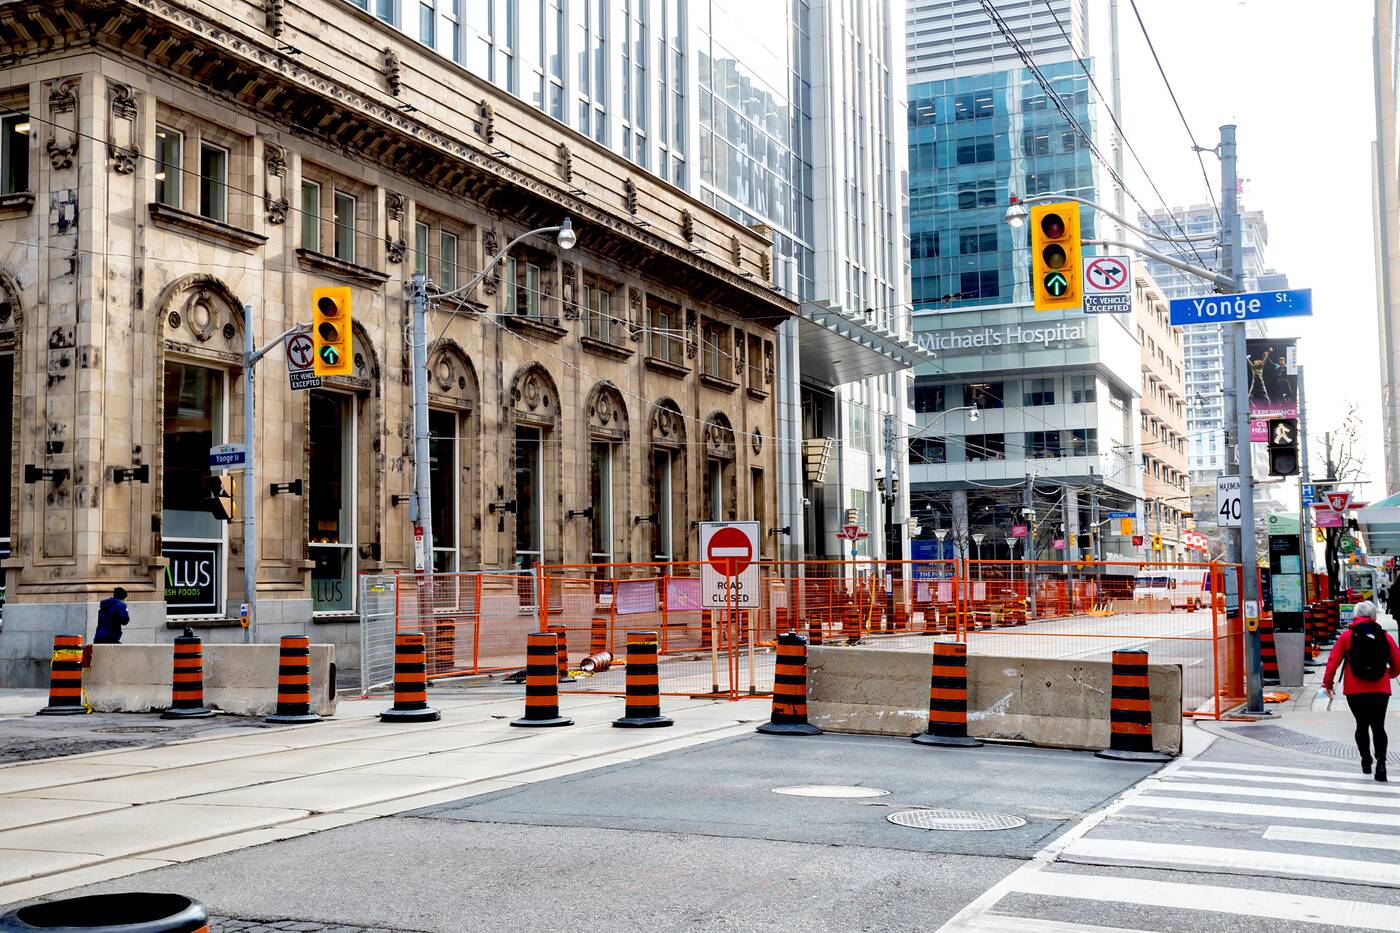 Here's what Toronto's Queen Street looks like now that 4-year closure is  underway